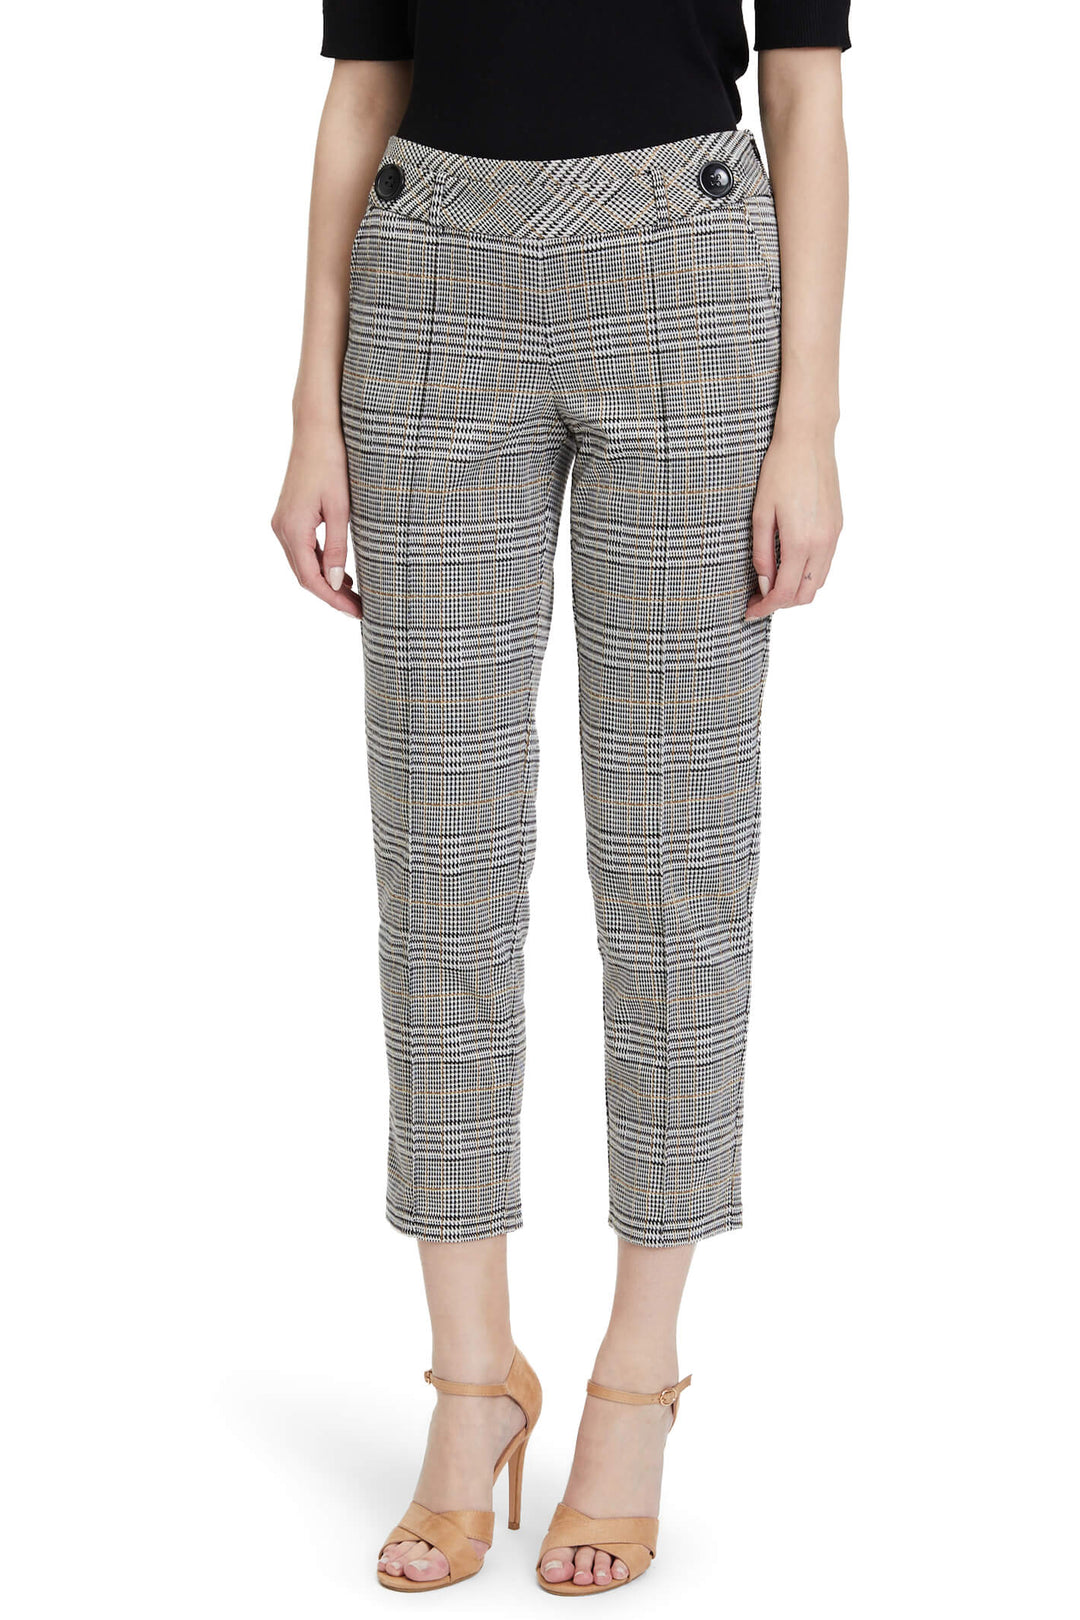 Betty Barclay 6811 2145 9875 Black Beige Checked Ankle Grazer Trousers - Dotique Chesterfield